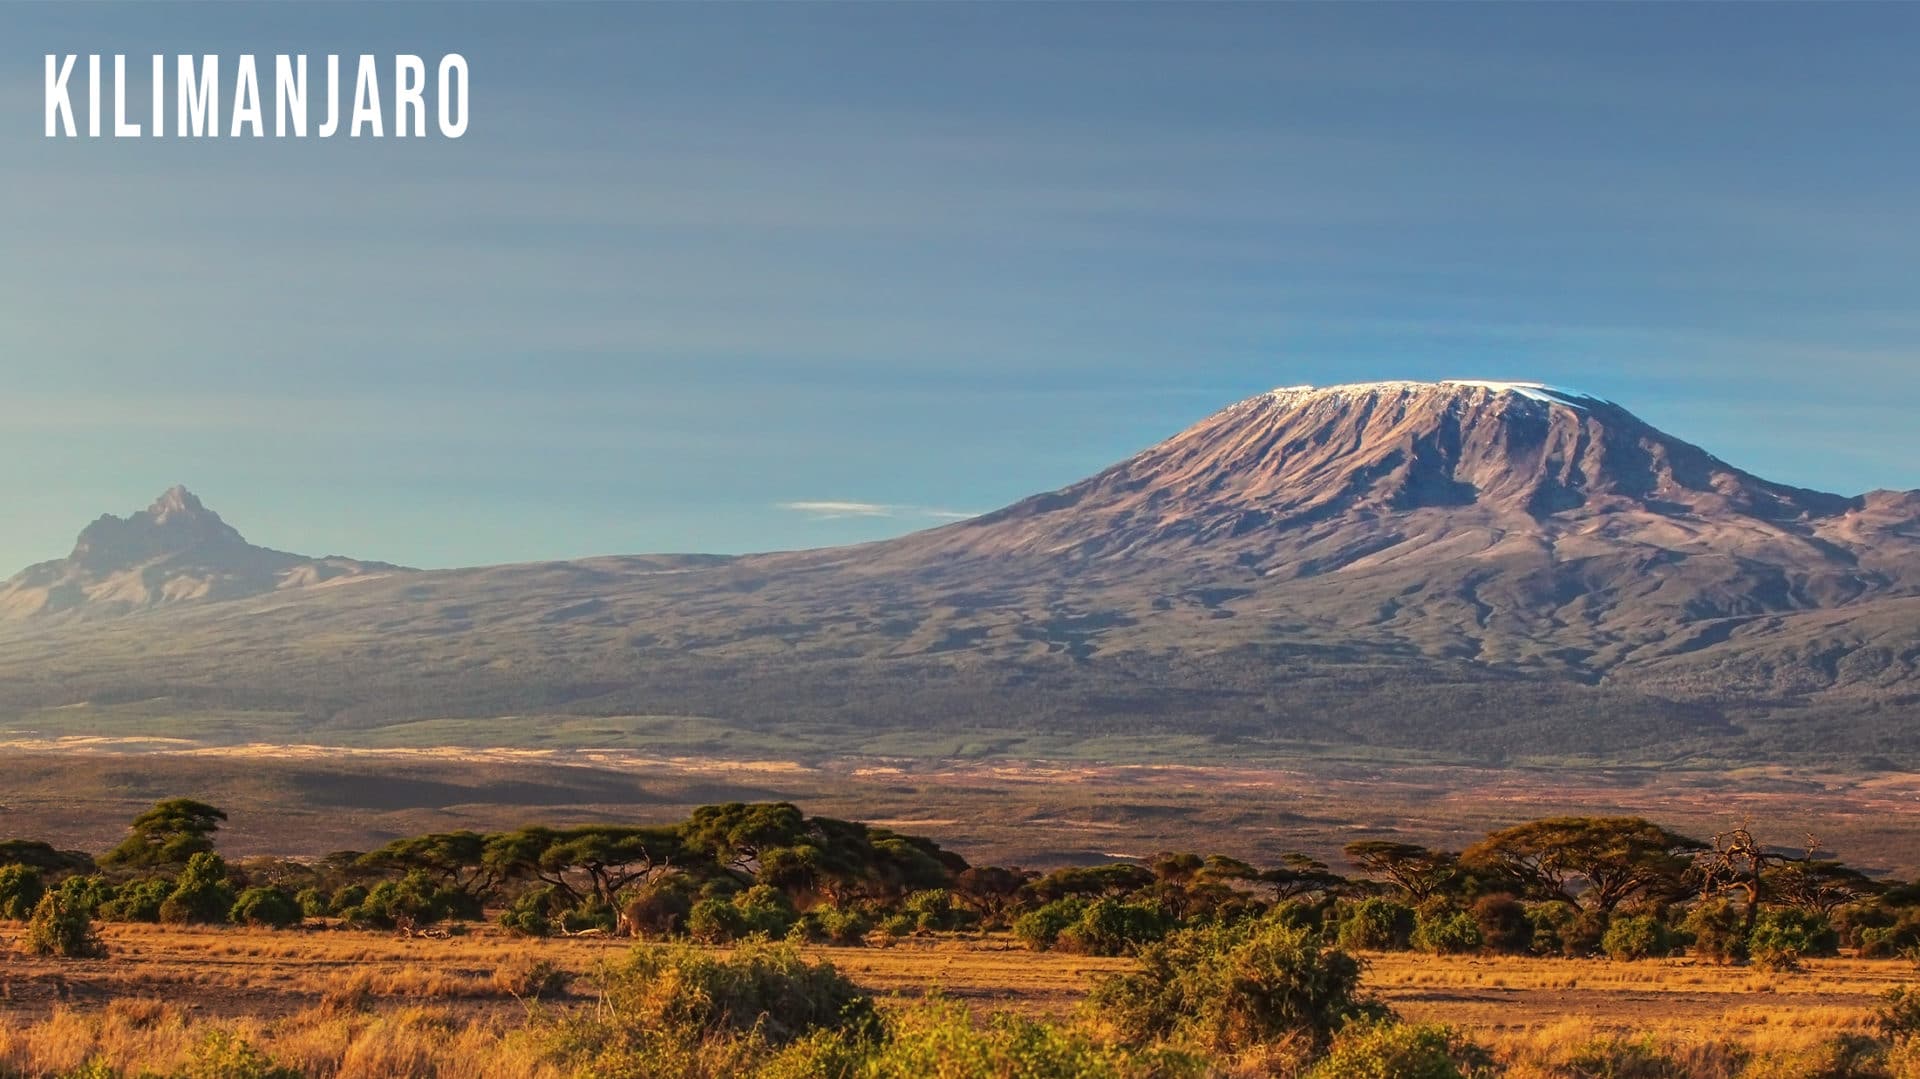 How Difficult is it to Climb Kilimanjaro?